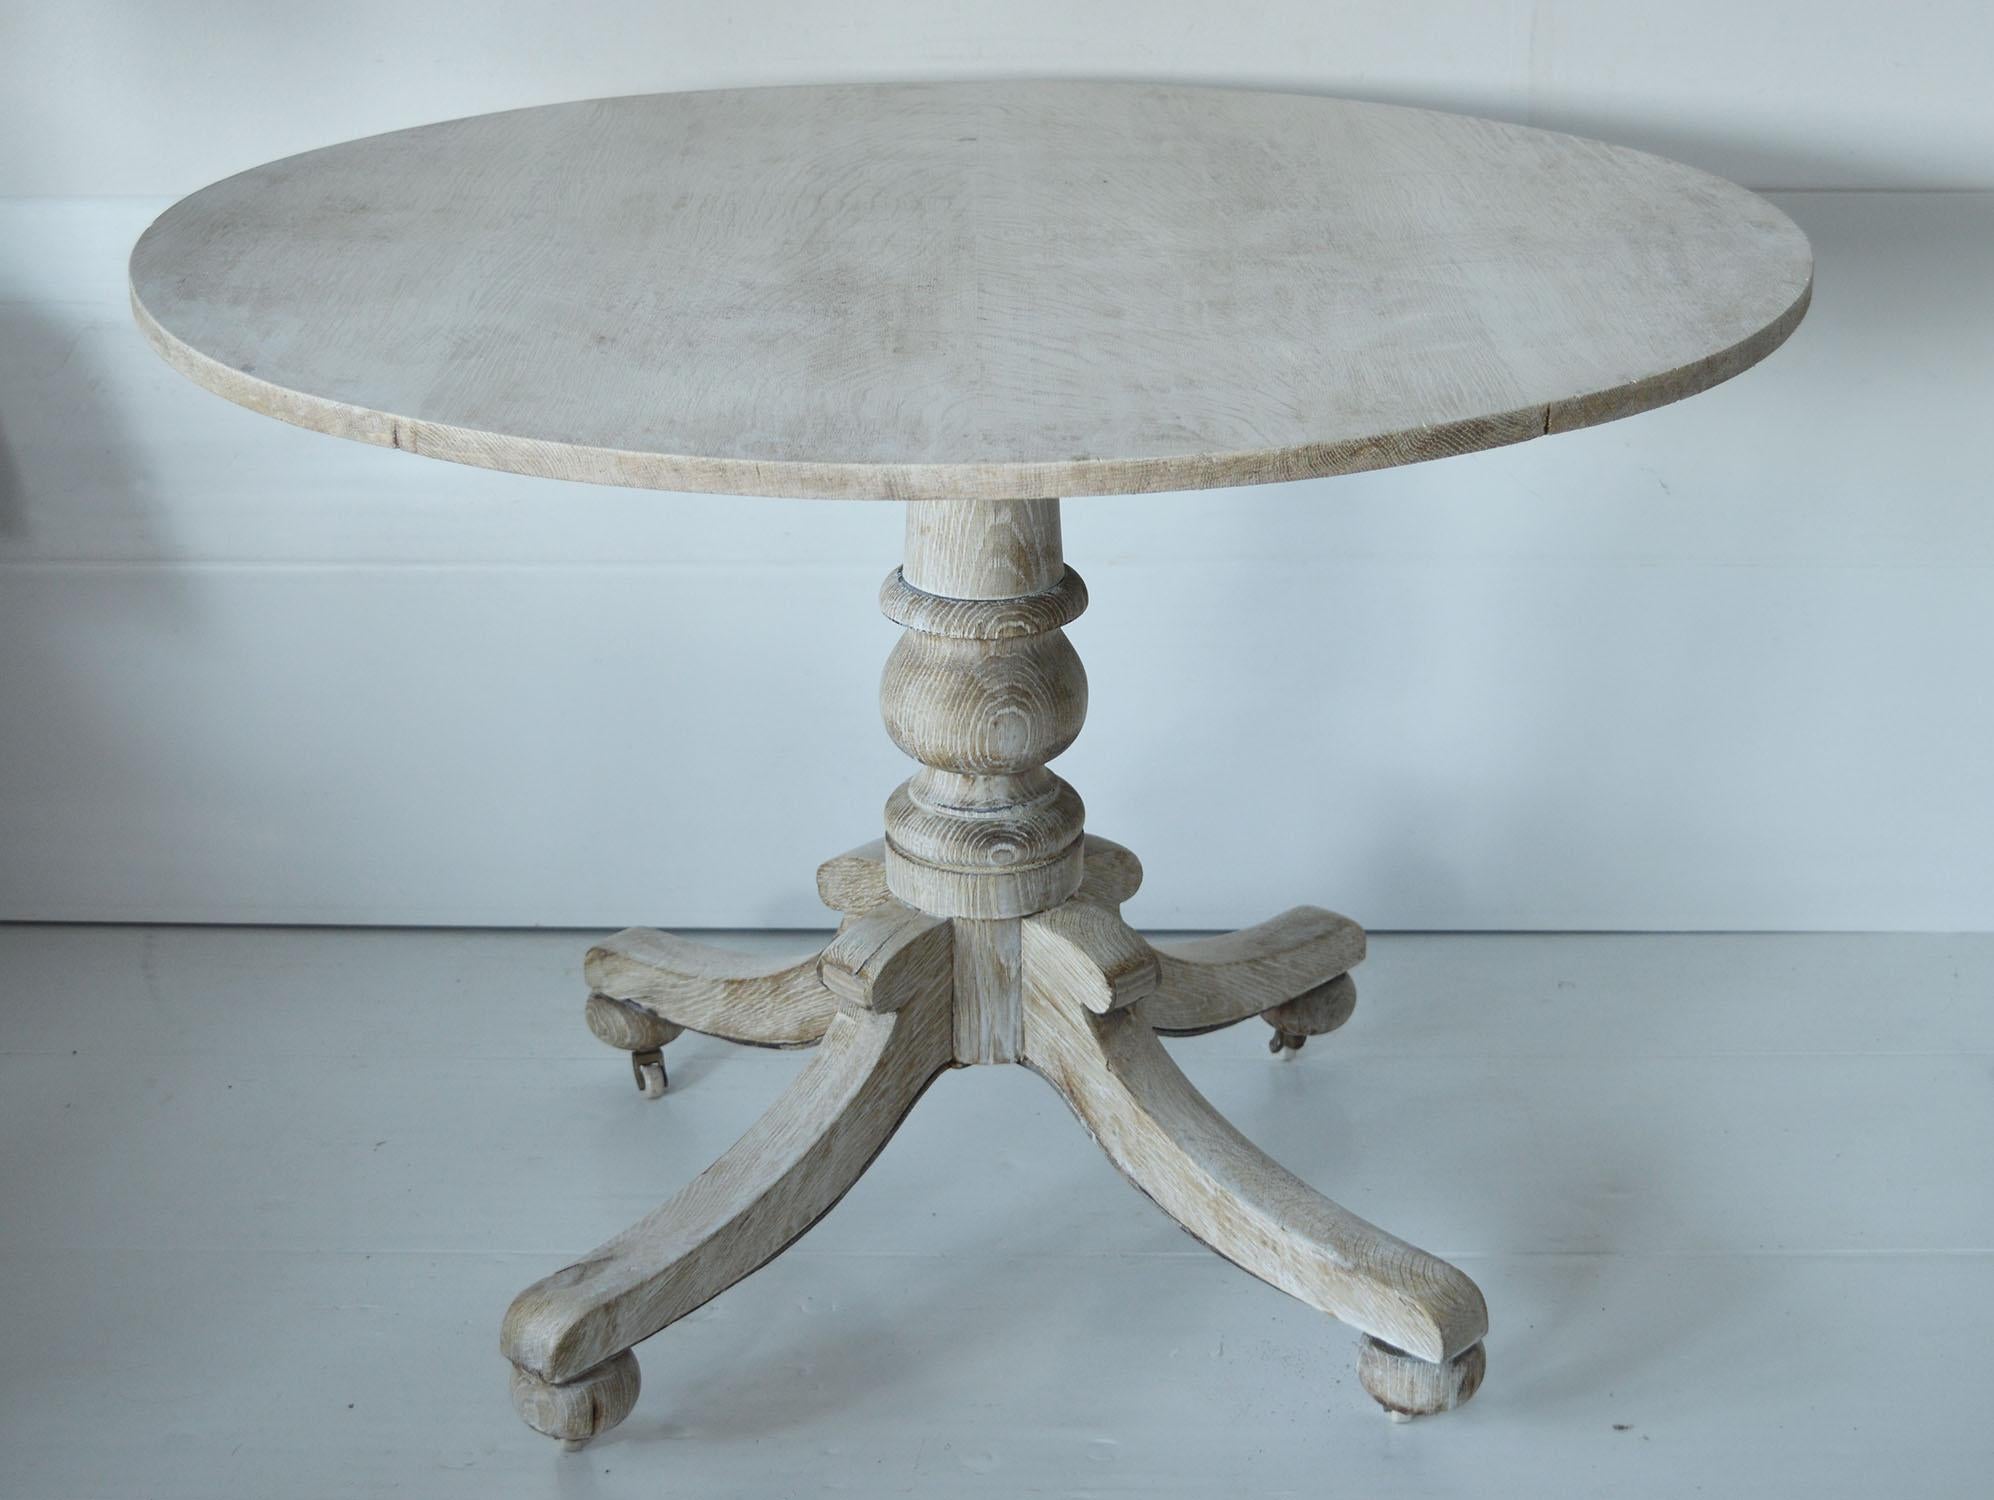 Fabulous bleached round table.

Great distressed look.

I particularly like the simplicity of this table

Bleached oak

I have chosen not to lacquer or wax the table.









  